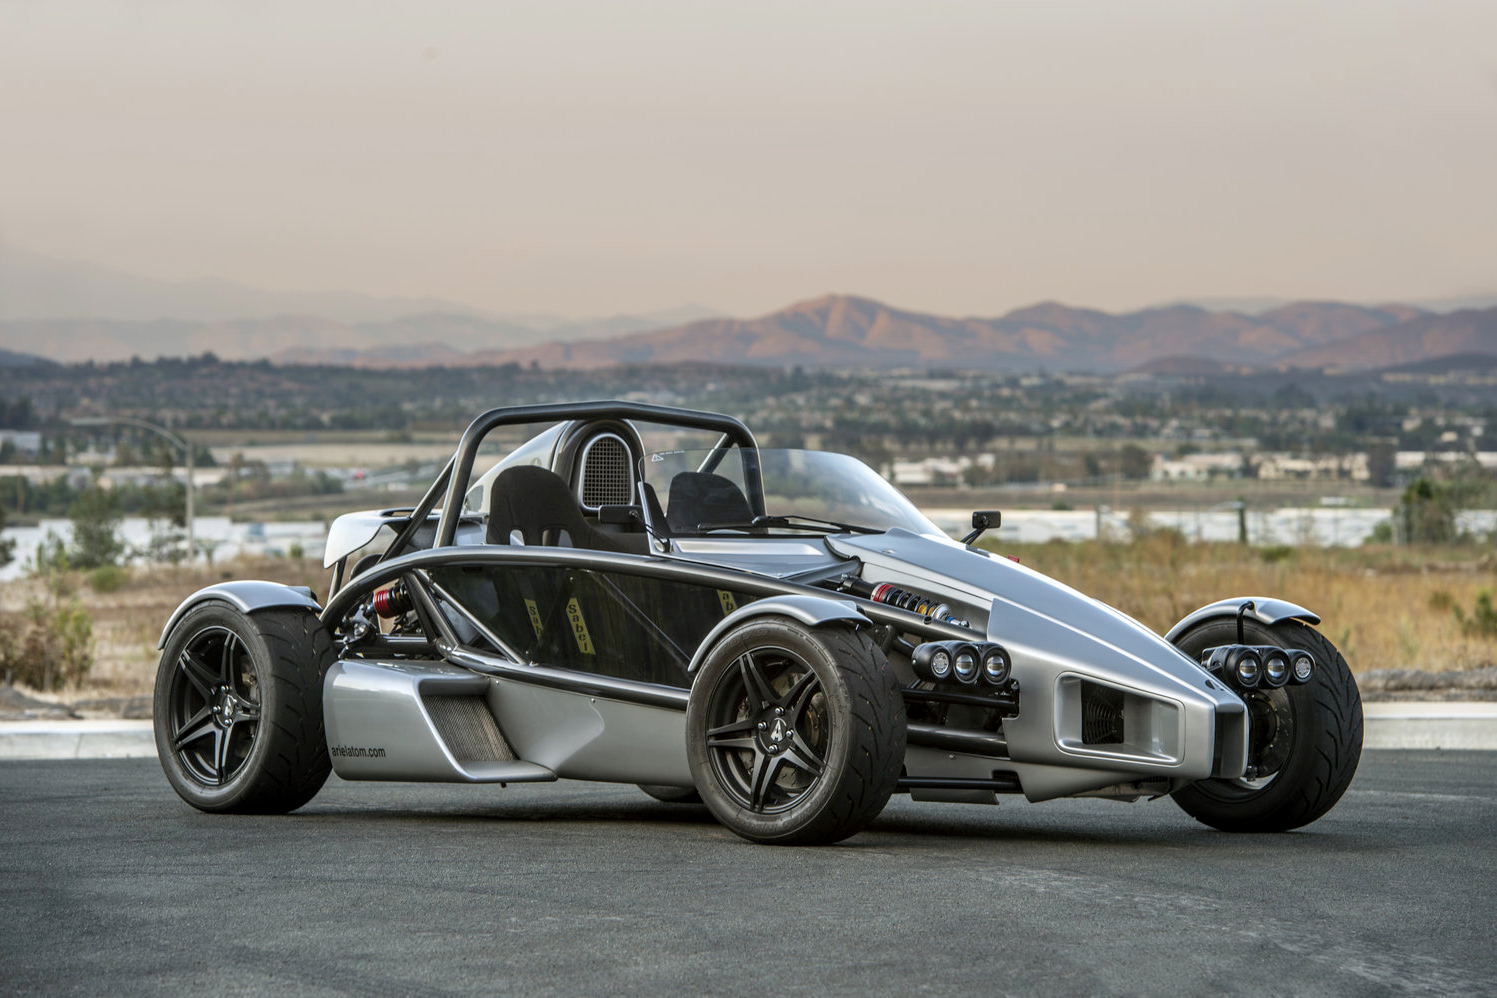 Ariel Atom 3RS open-air sports car parked on pavement with desert mountains in the background.